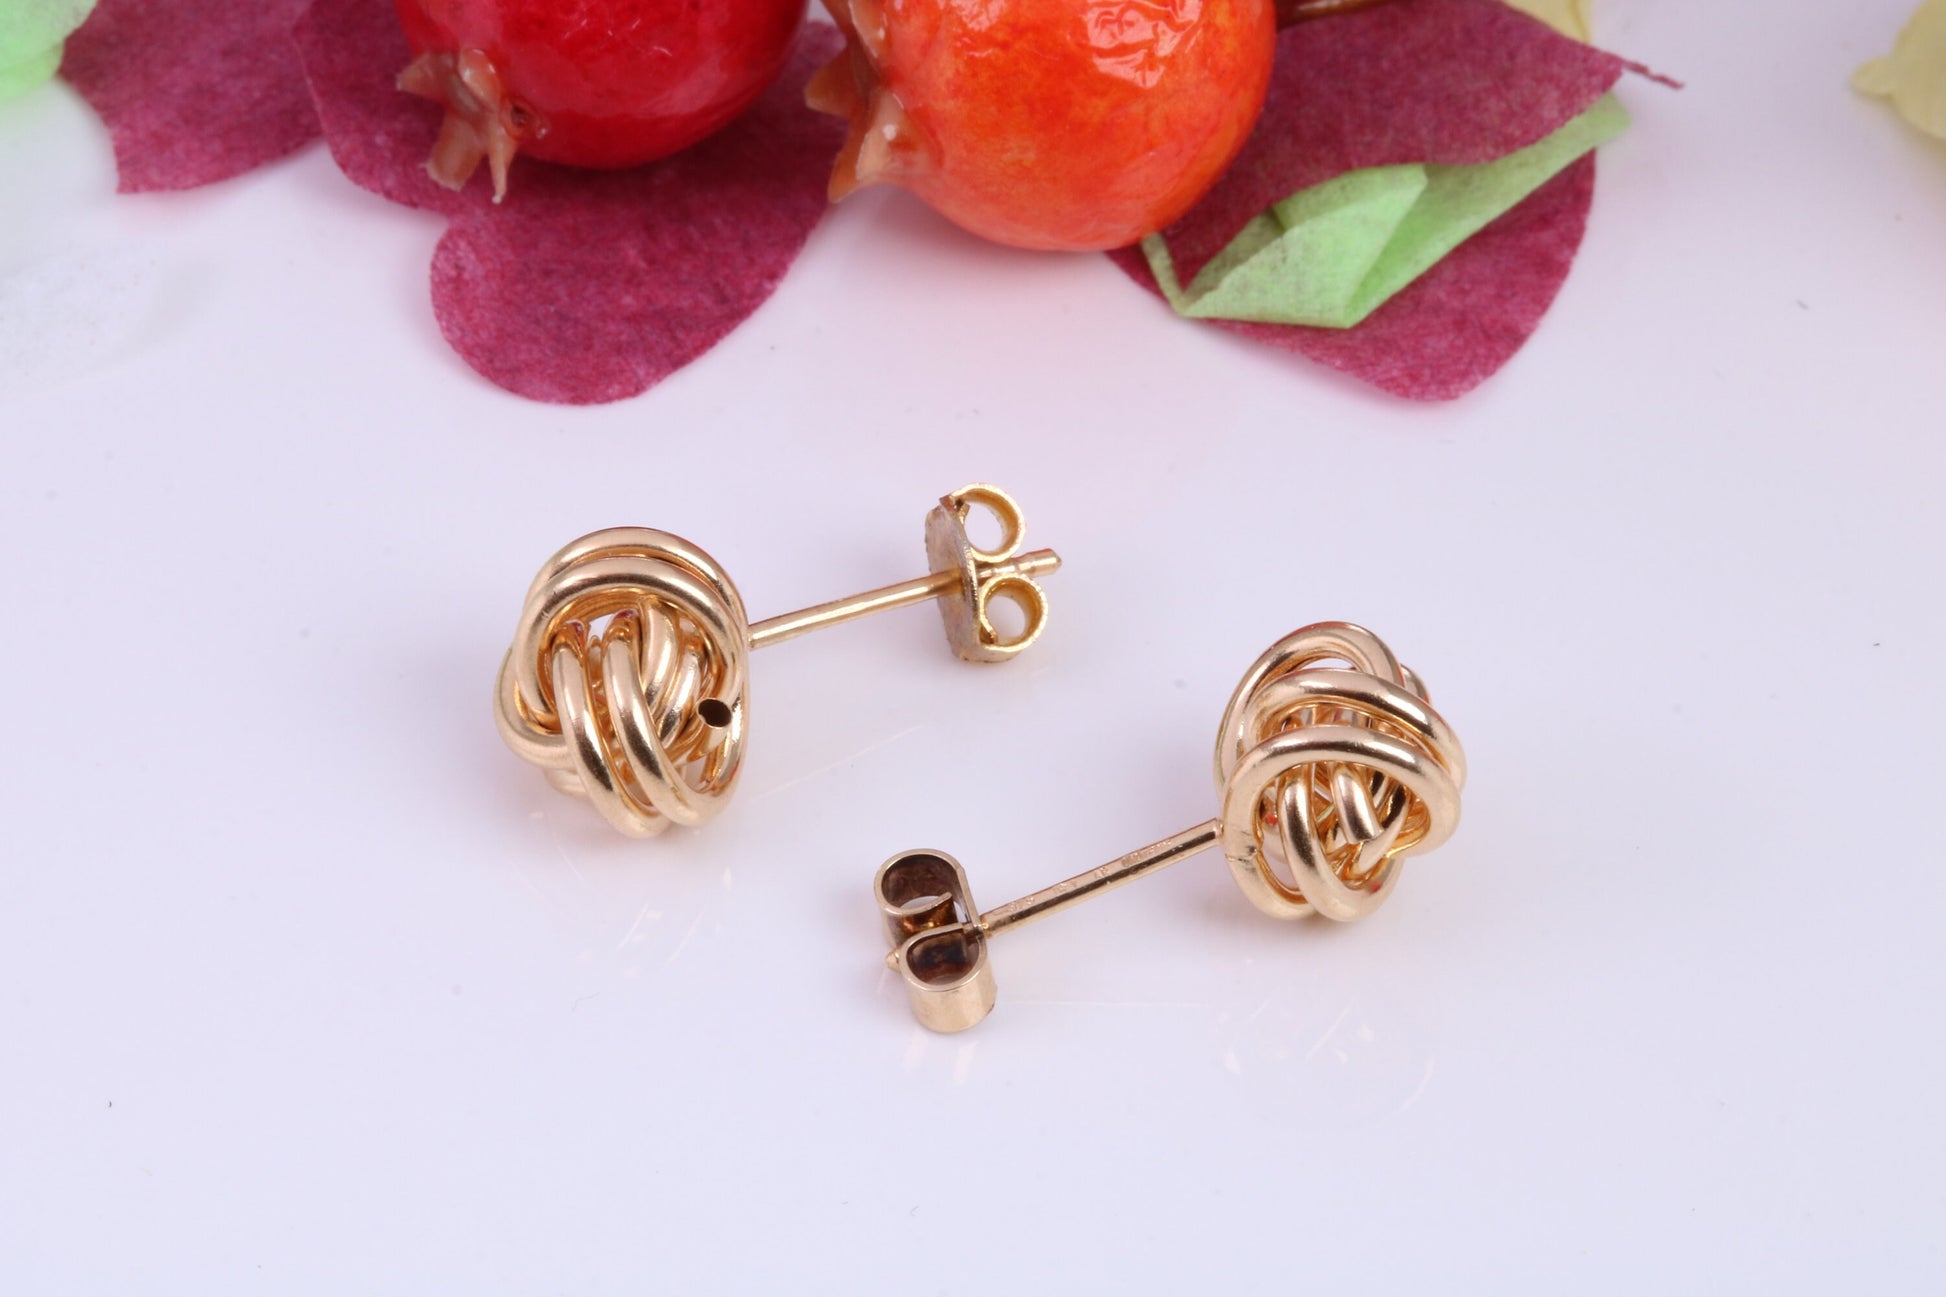 10 mm Round Knotted Stud Earrings Made from Solid 9ct Yellow Gold, British Hallmarked